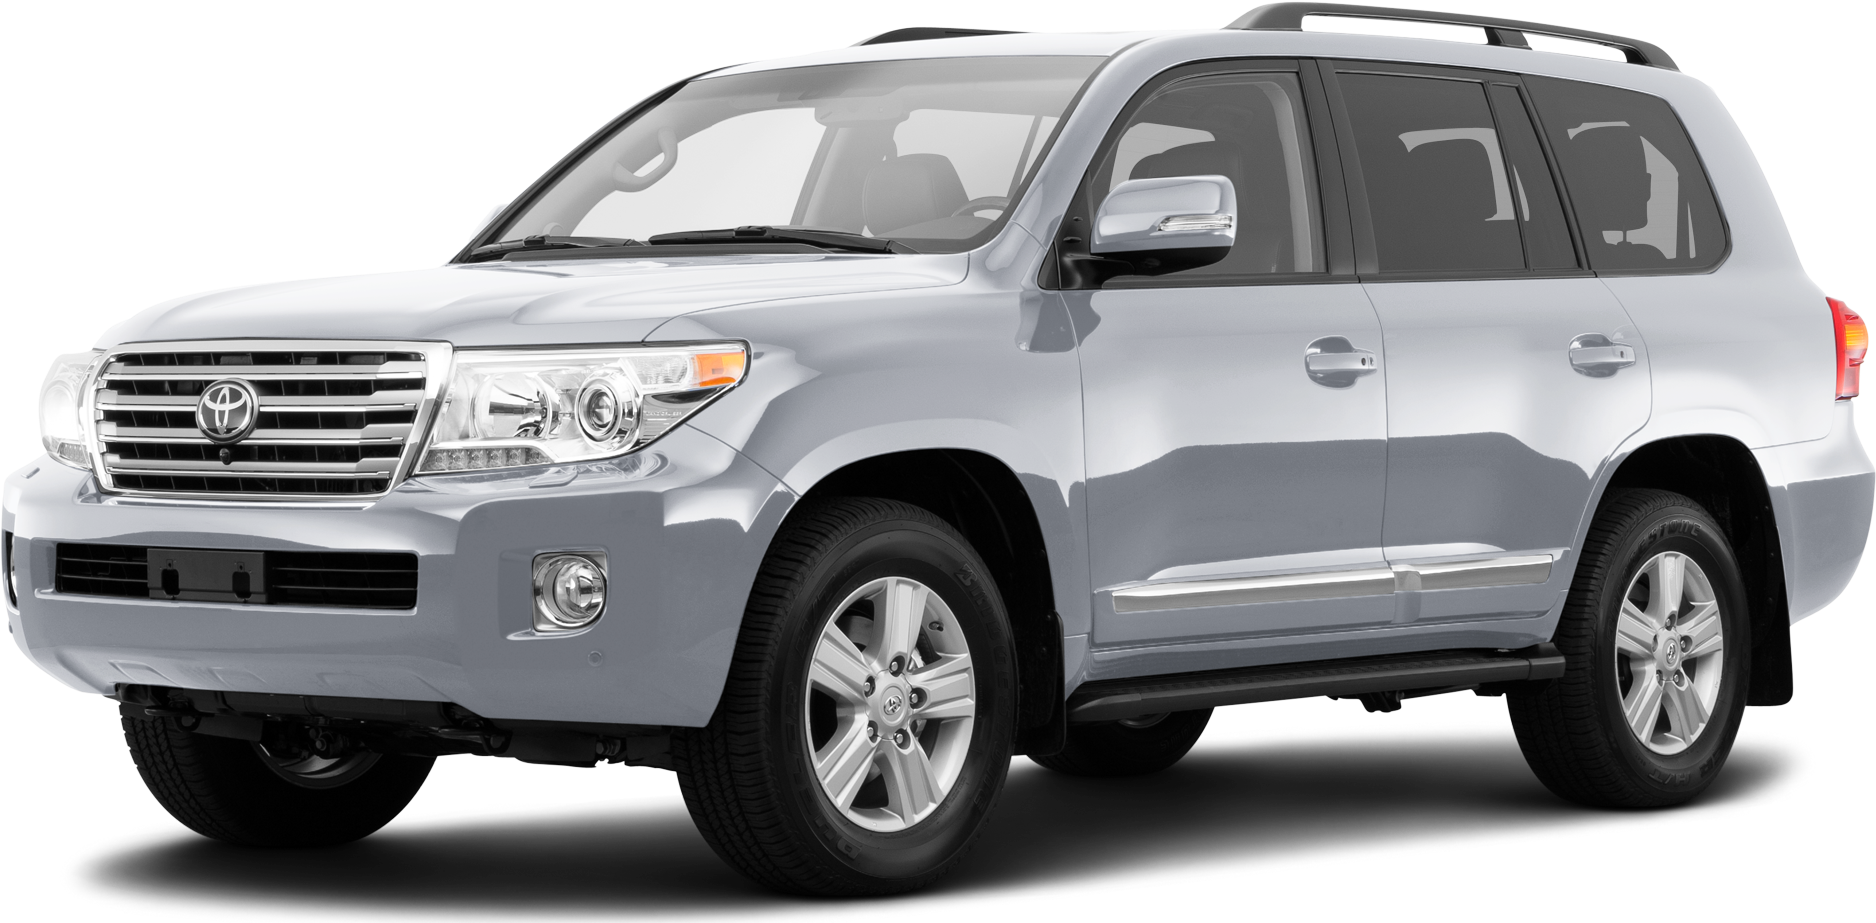 2014 Toyota Land Cruiser Price, Value, Ratings & Reviews Kelley Blue Book